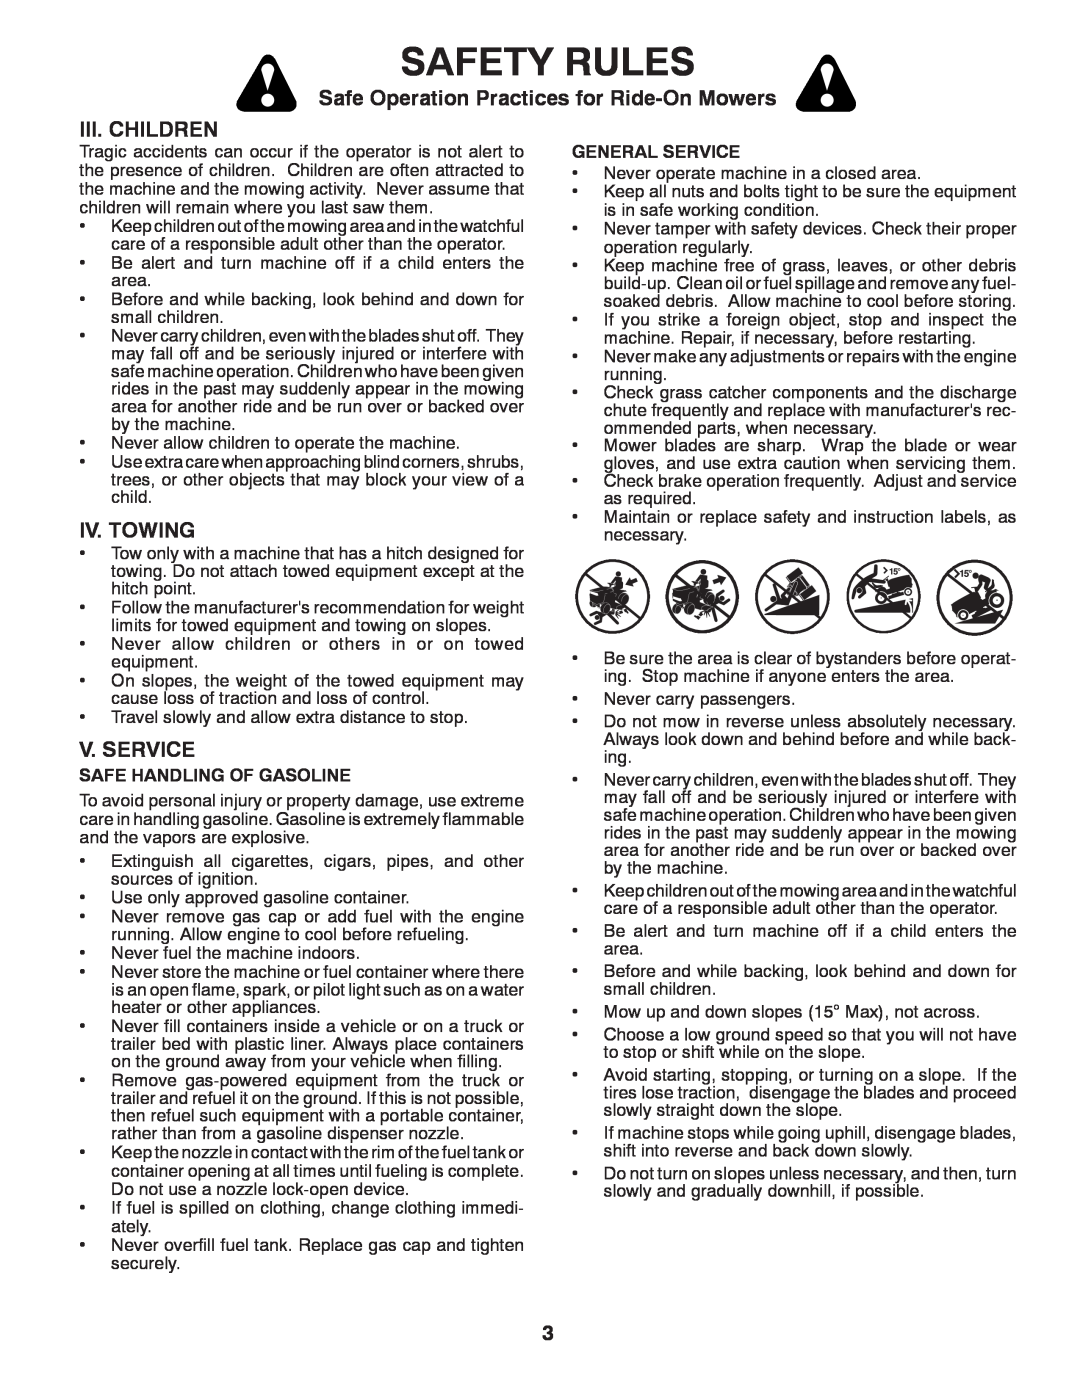 Dixon D22H46, 433616 manual Iii. Children, Iv. Towing, V. Service, Safety Rules, Safe Operation Practices for Ride-OnMowers 